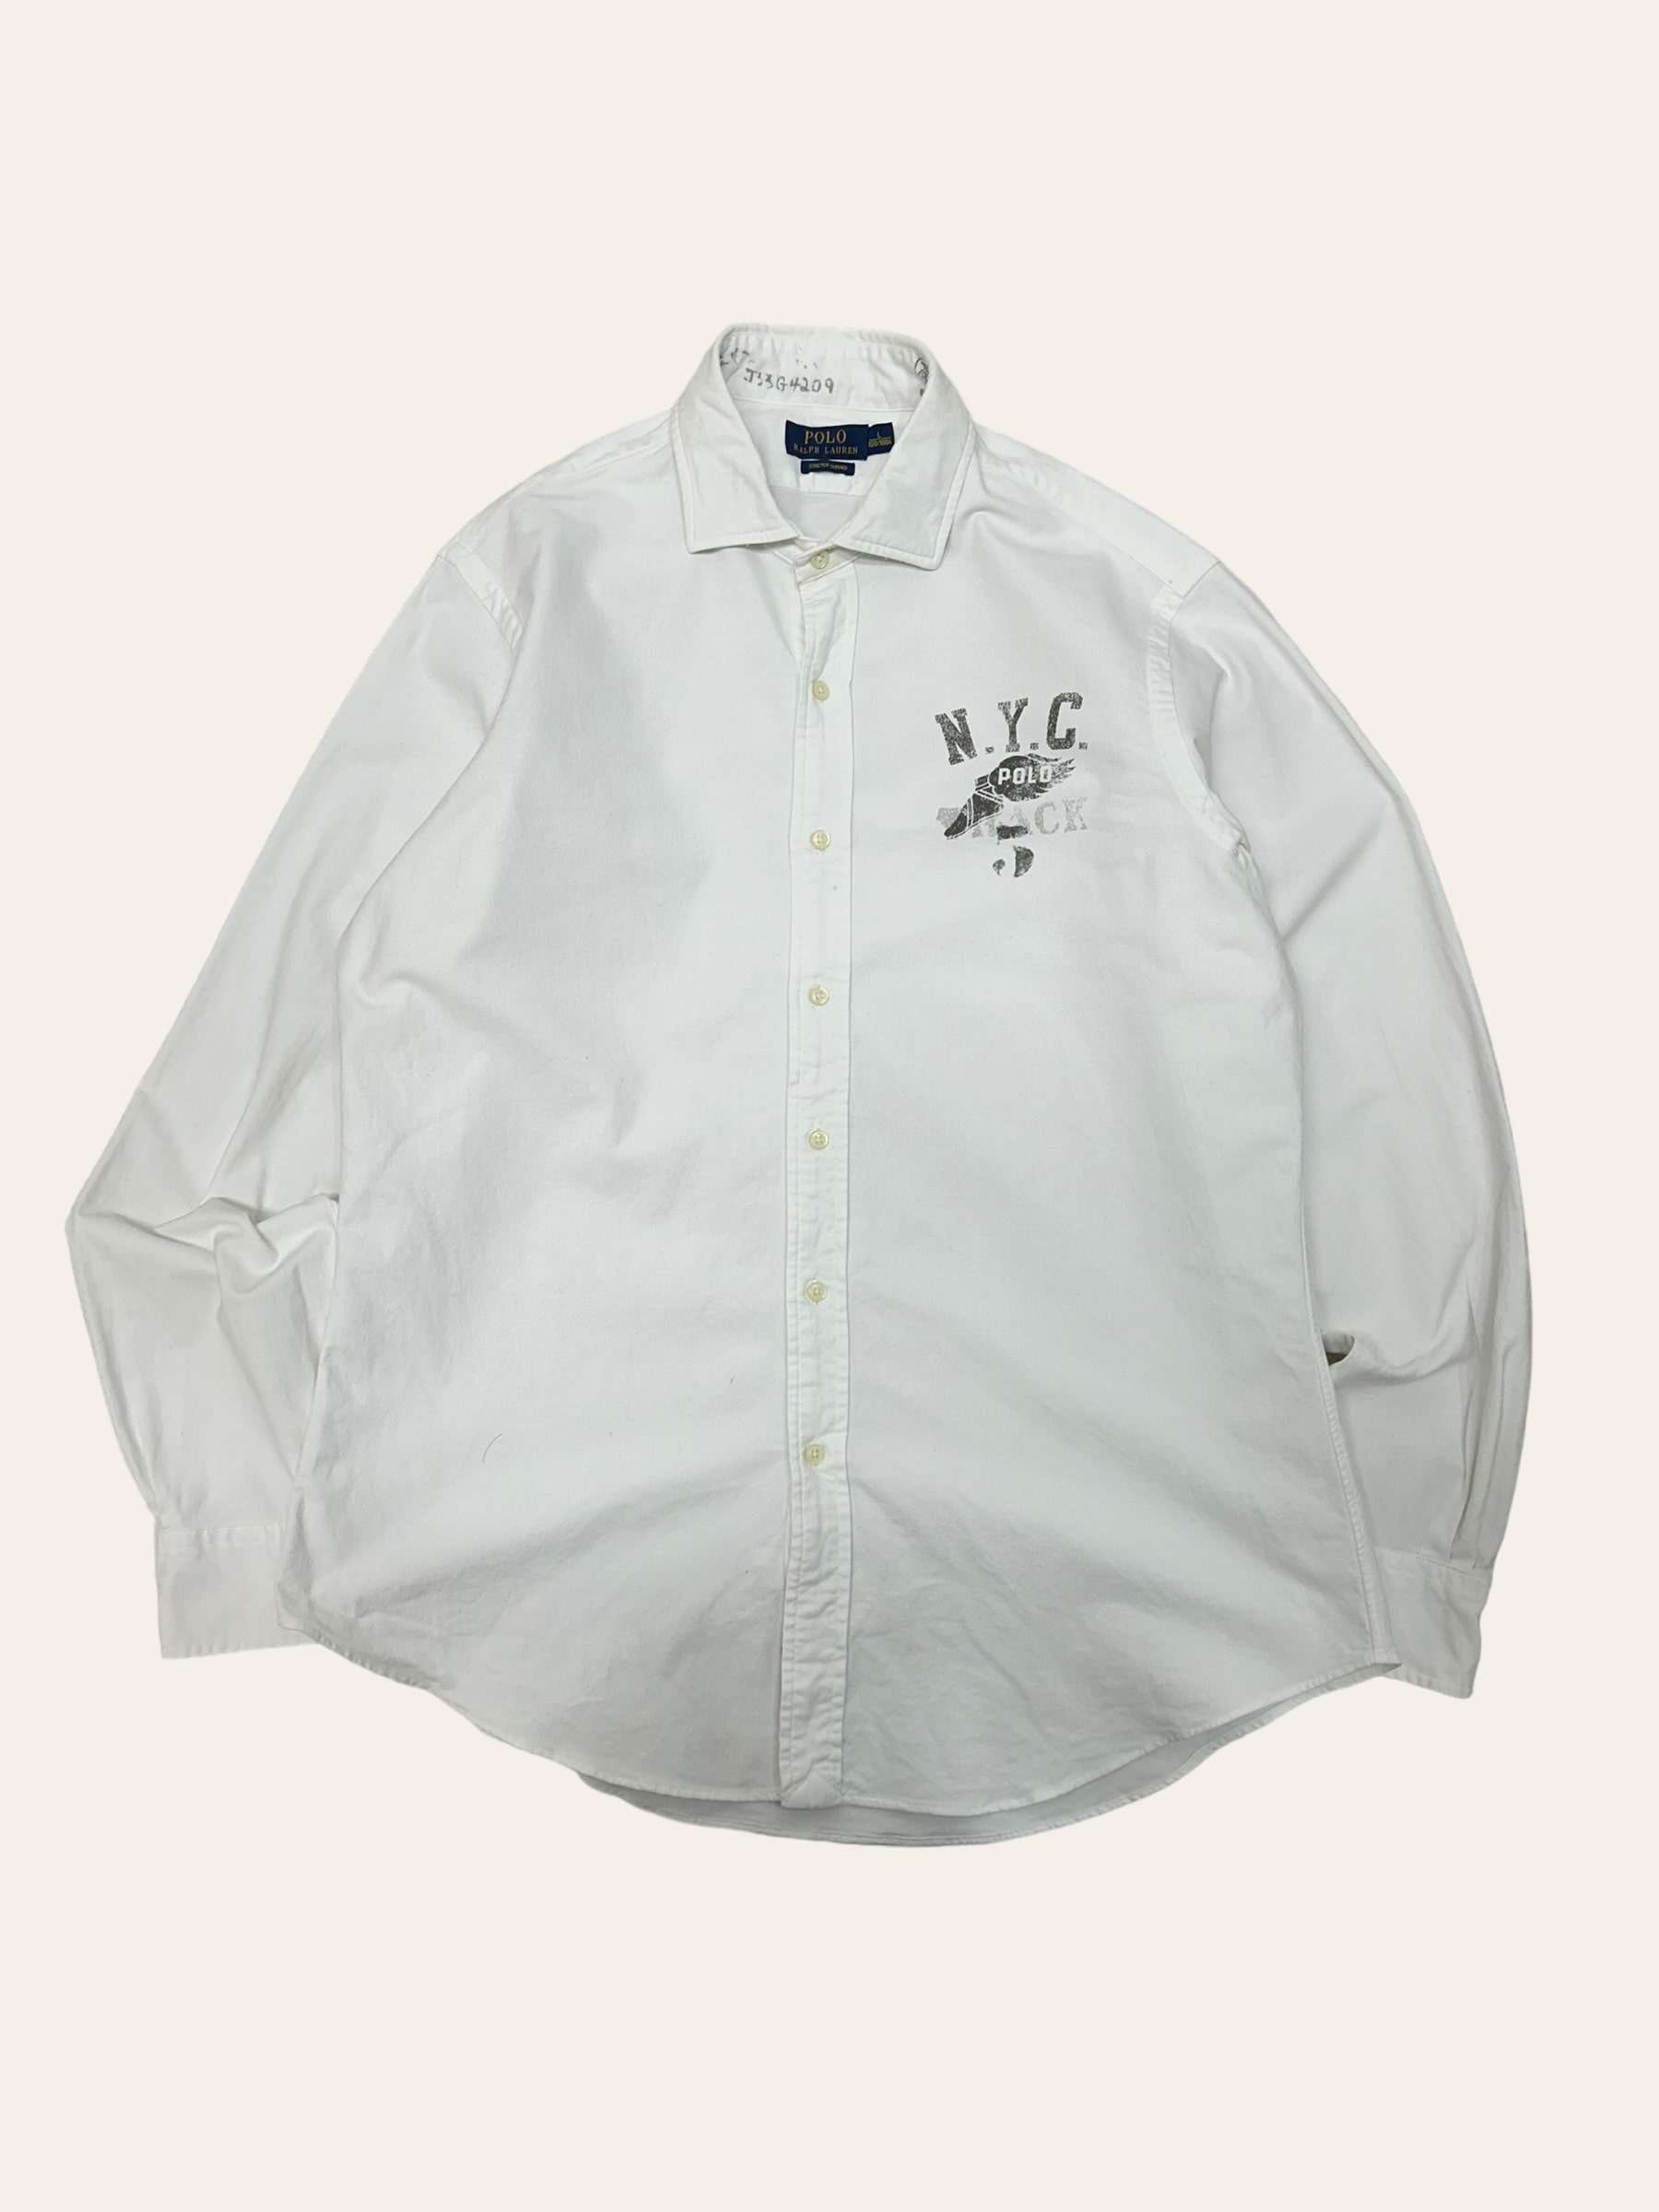 Polo ralph lauren white NYC winged printing oxford shirt L